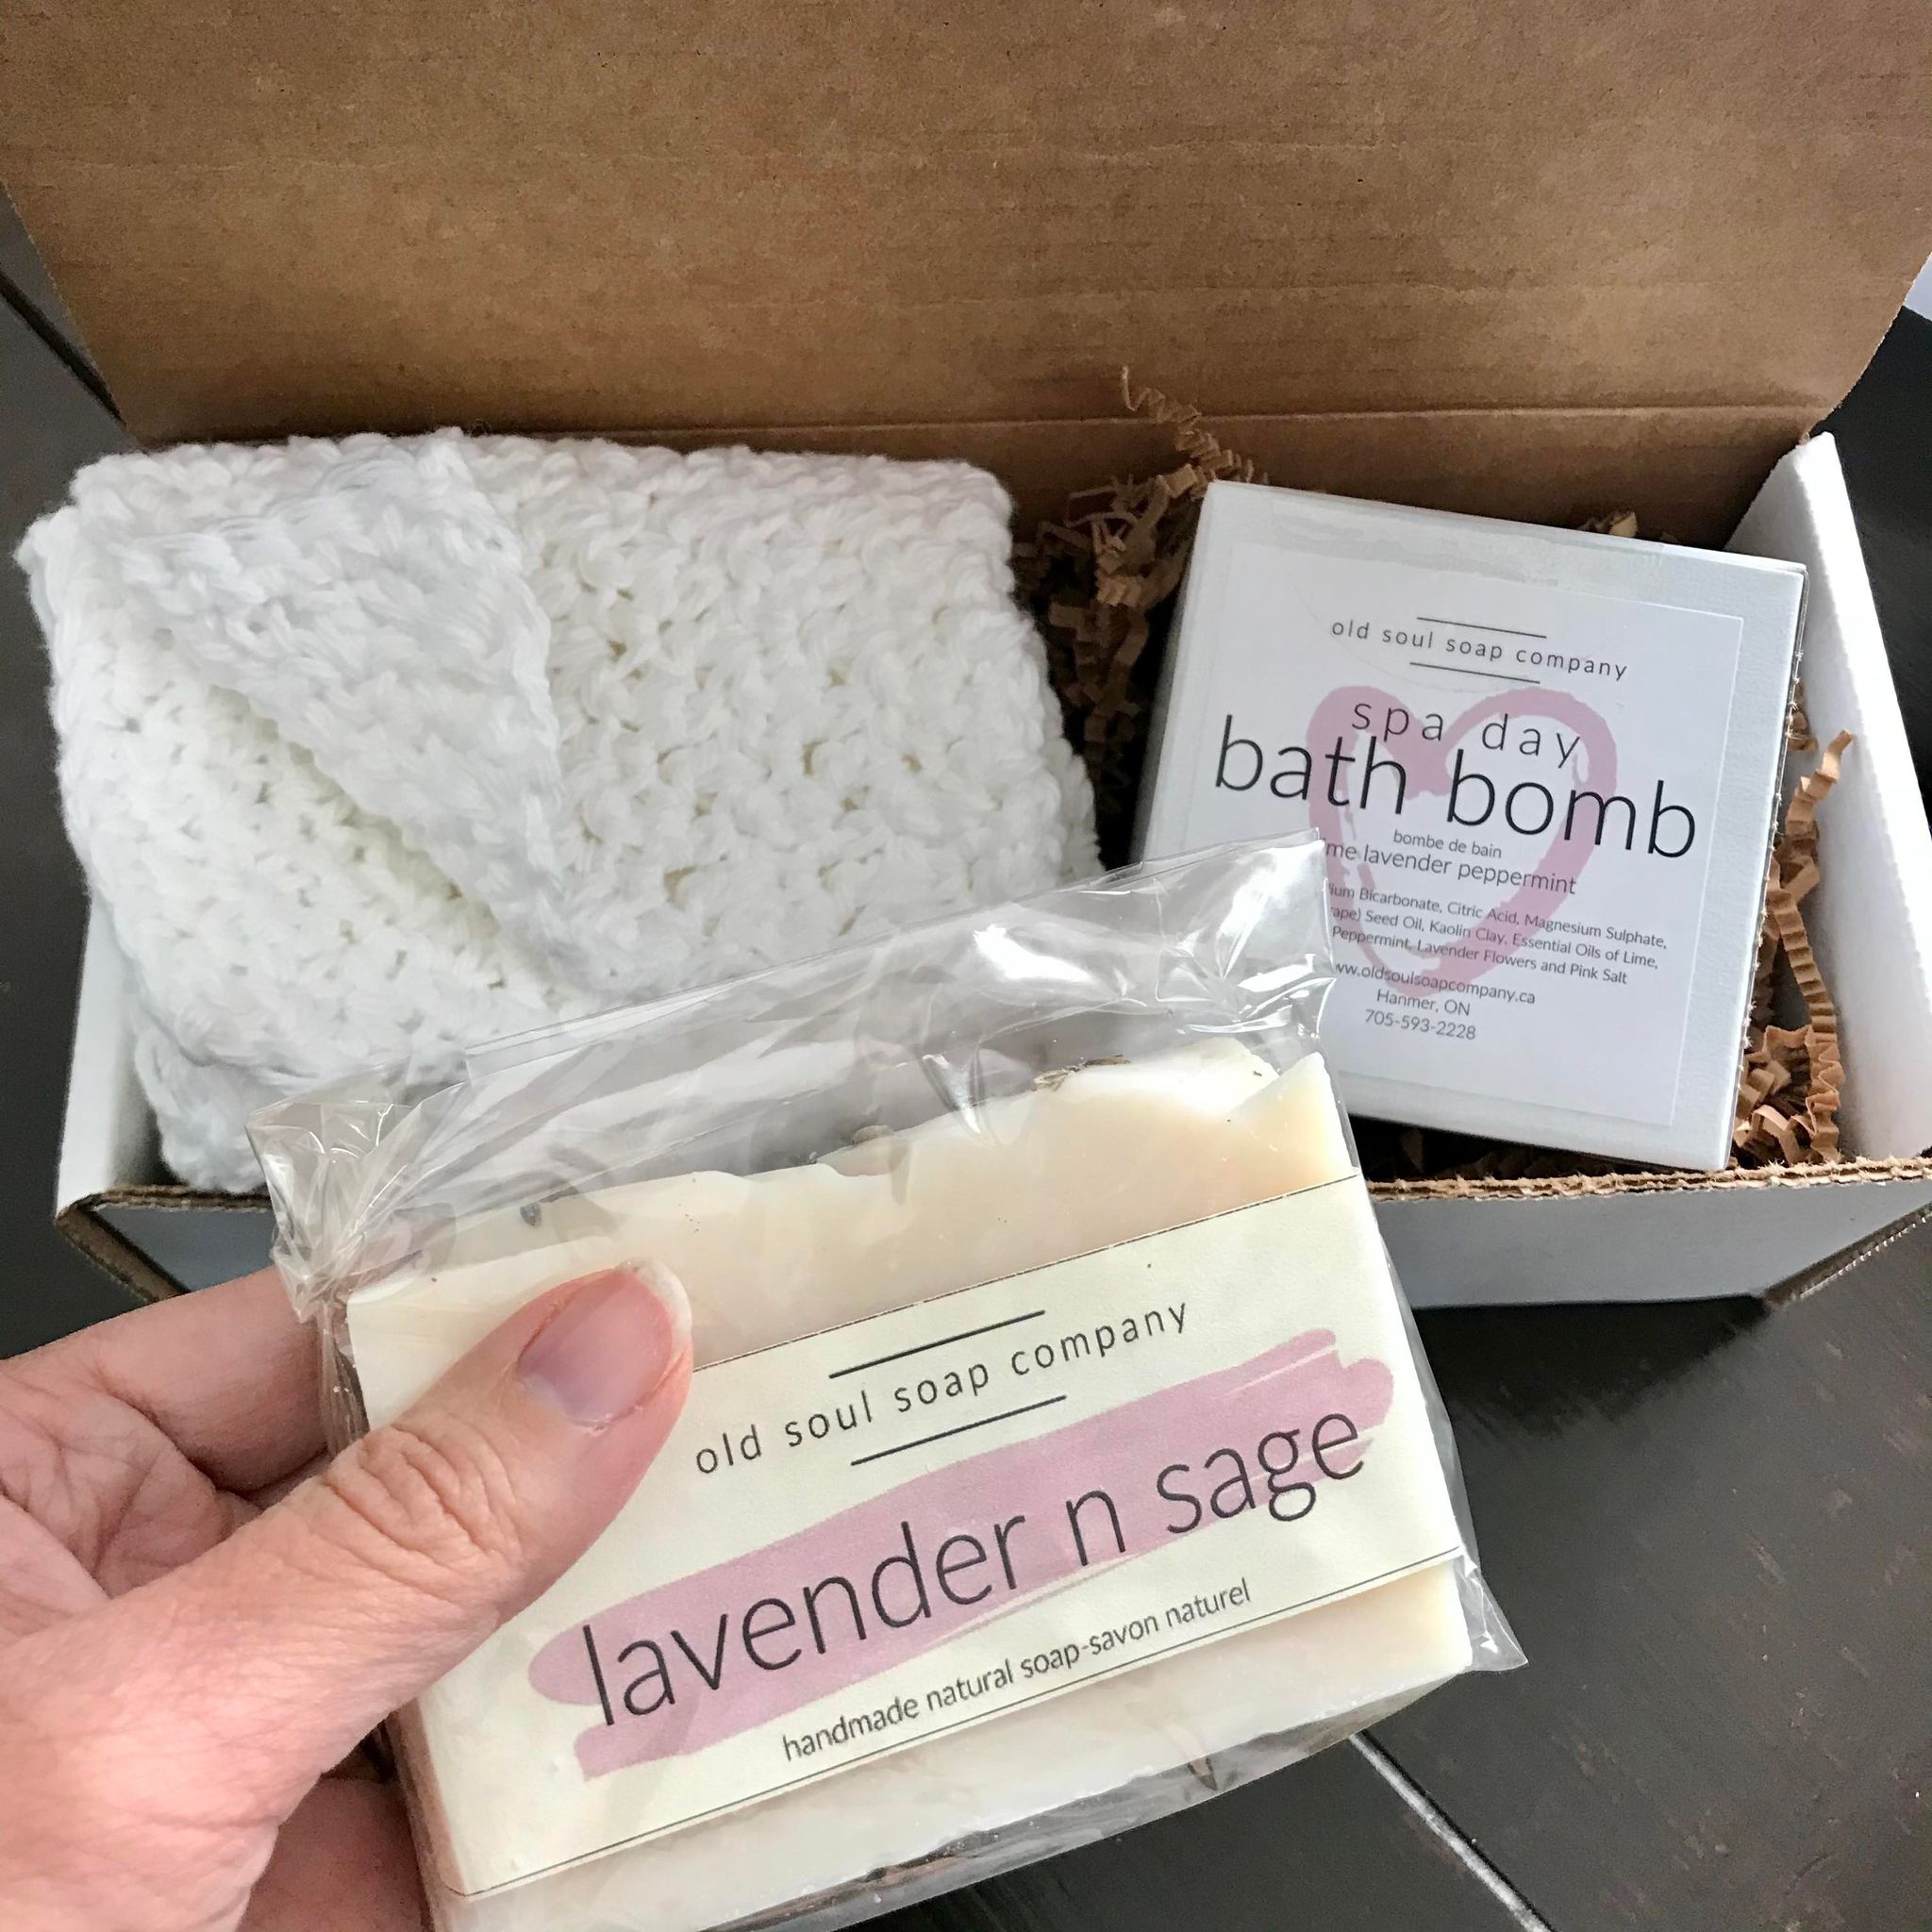 This spa day gift box features three Canadian made products - white crocheted spa cloth, a handcrafted lavender n sage vegan soap and a spa day bath bomb from the Old Soul Soap Company